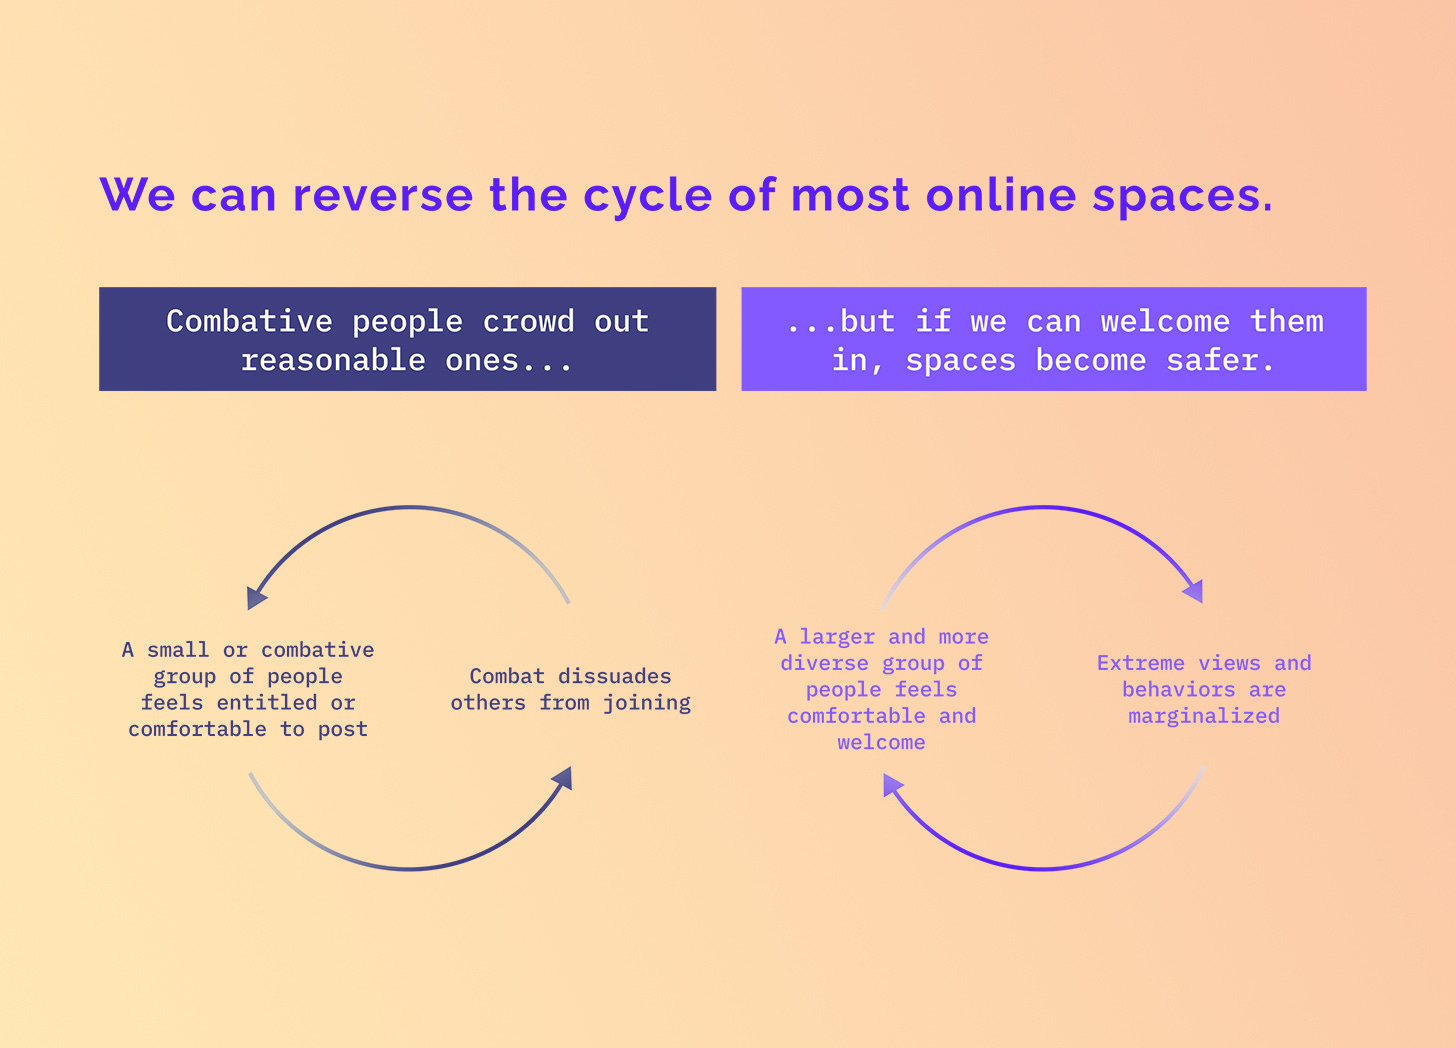 A diagram showing how we can reverse the cycle of most online spaces from a cycle of combative people crowing out reasonable ones, to a cycle of if we welcome them in, spaces become safer